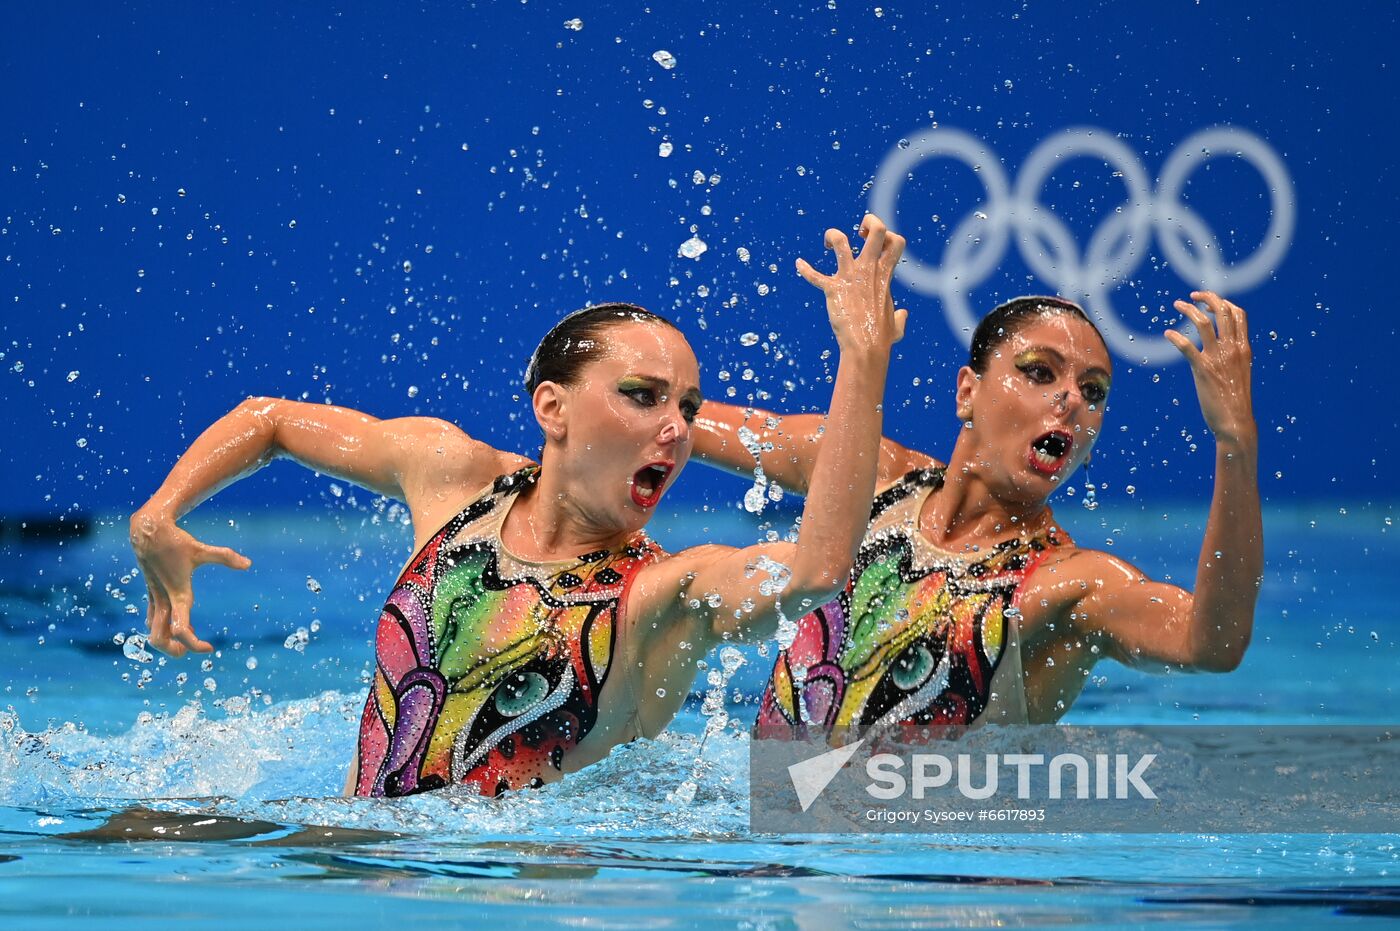 Japan Olympics 2020 Artistic Swimming Duet Free Routine